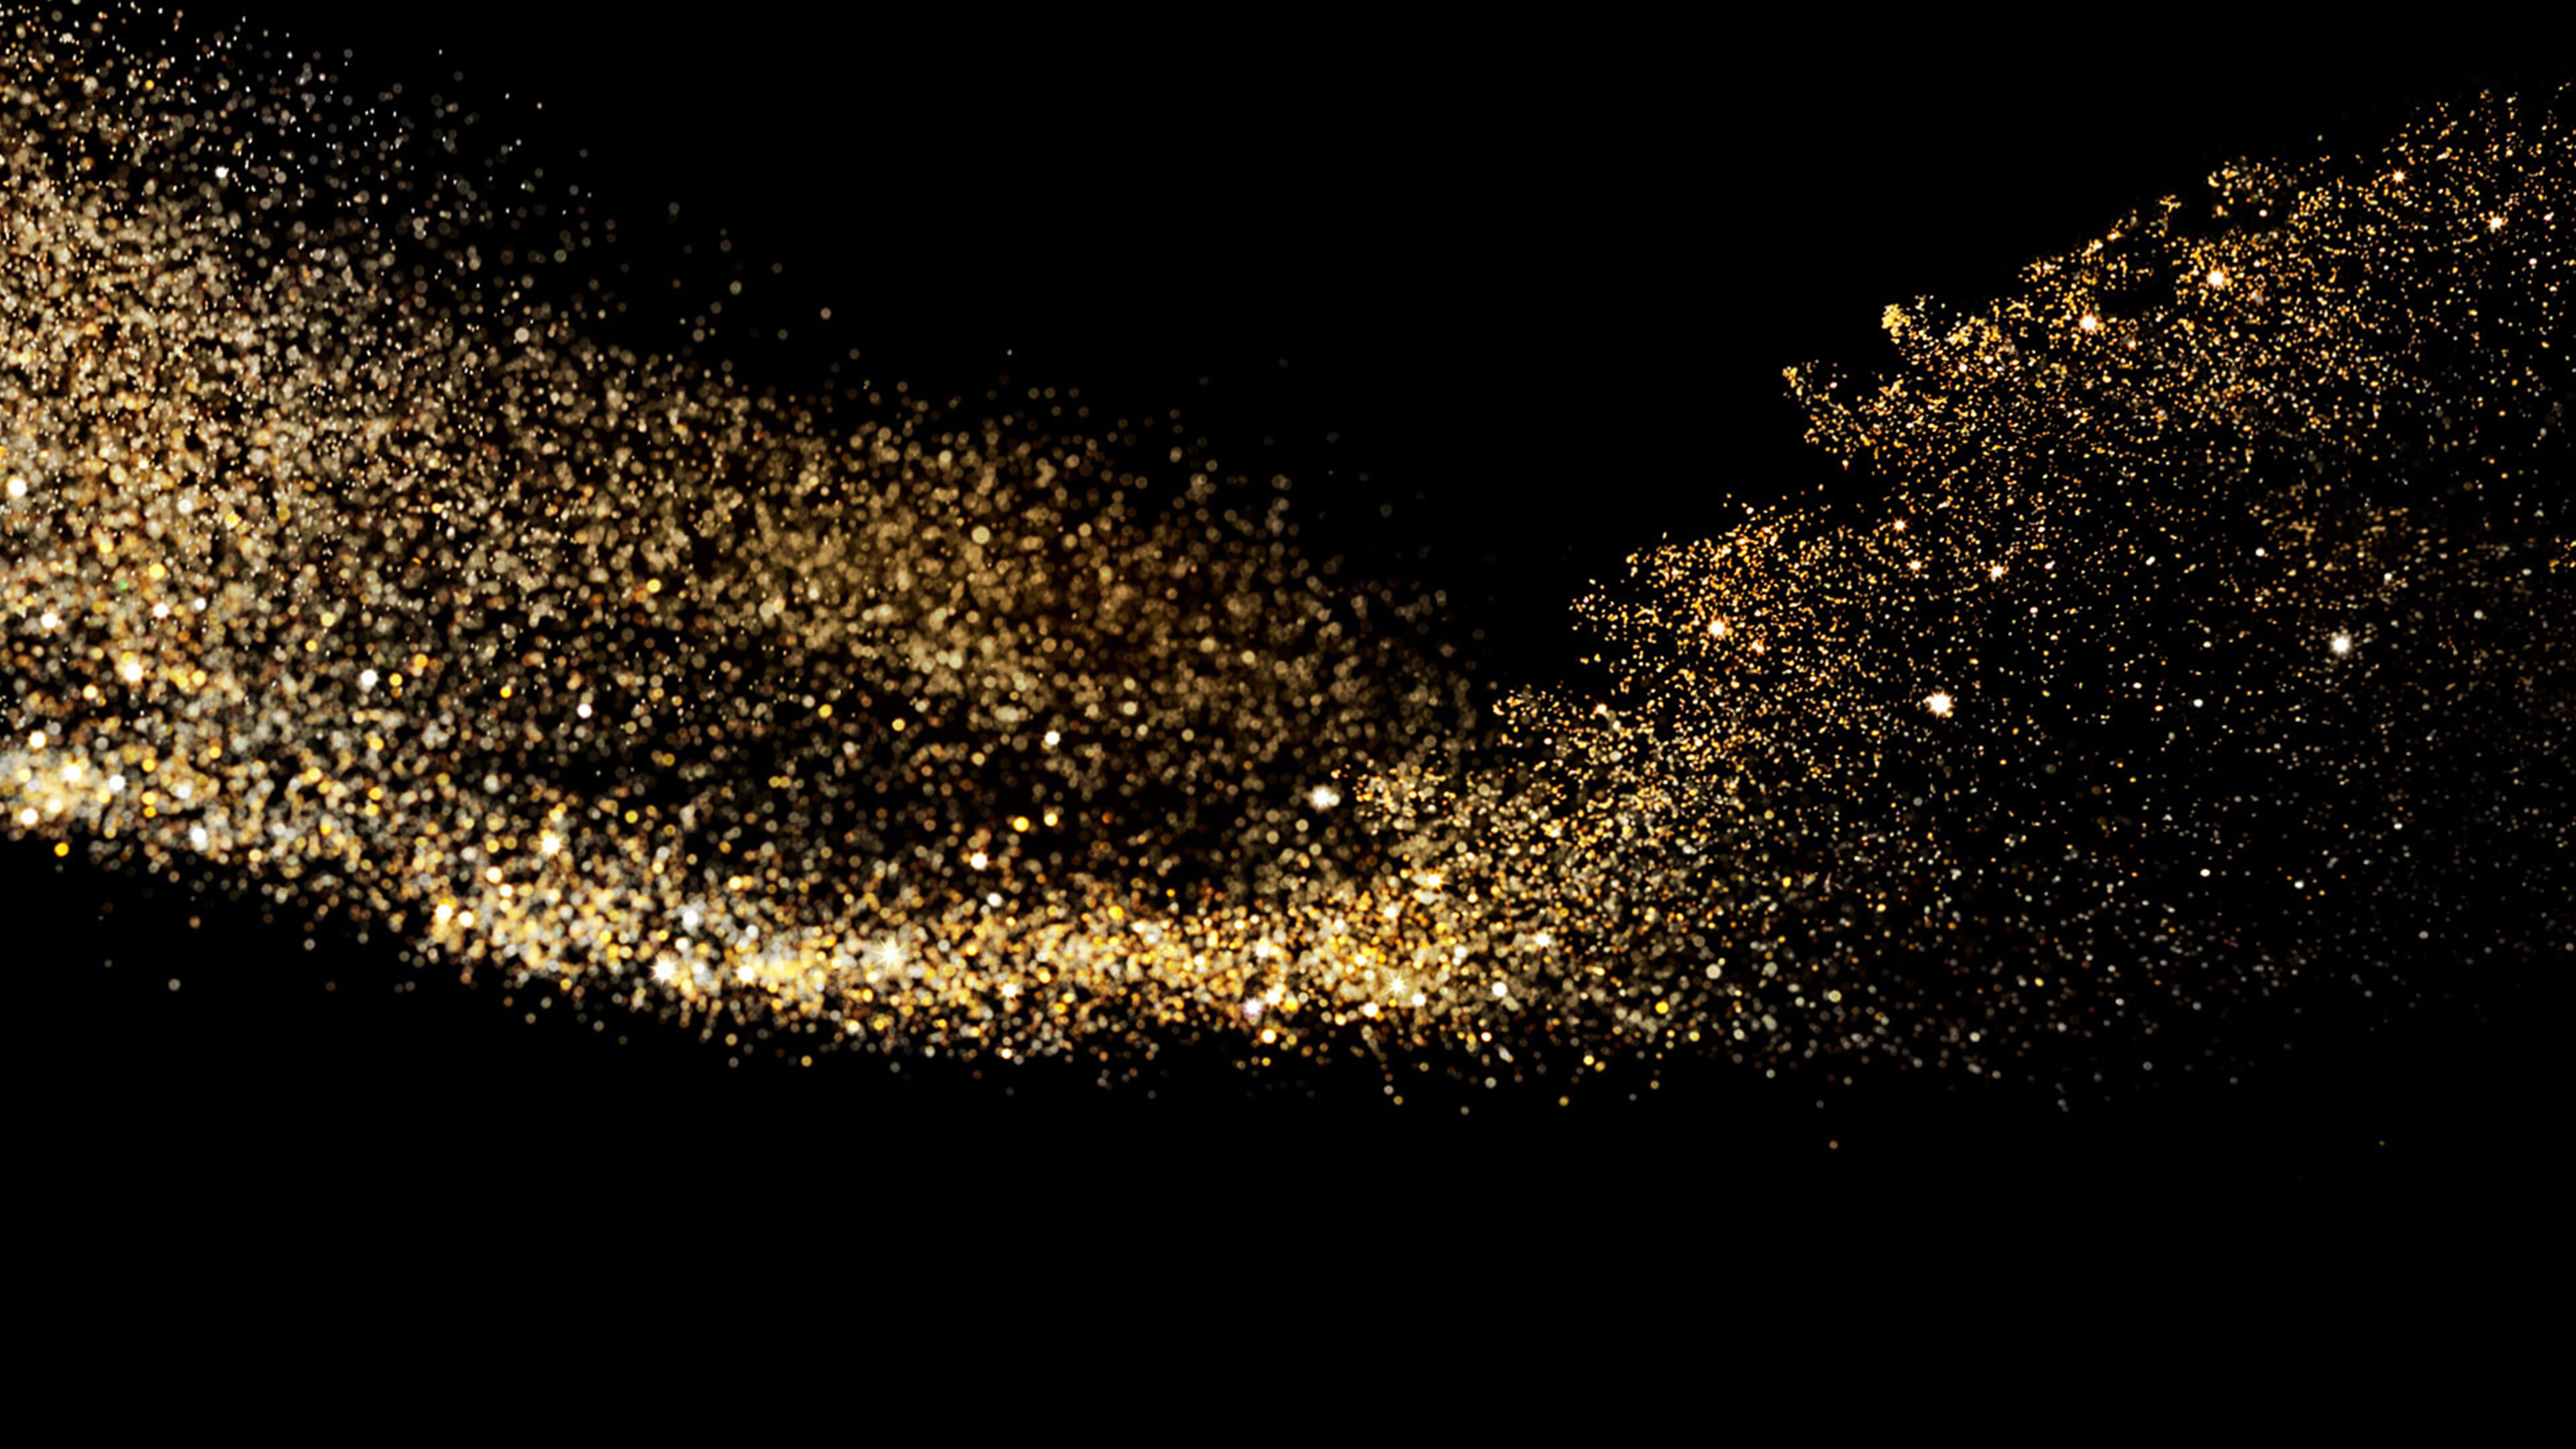 Gold Sparkle: Small particles with golden glittering surfaces scattered in the darkness, Golden dust explosion. 3840x2160 4K Background.